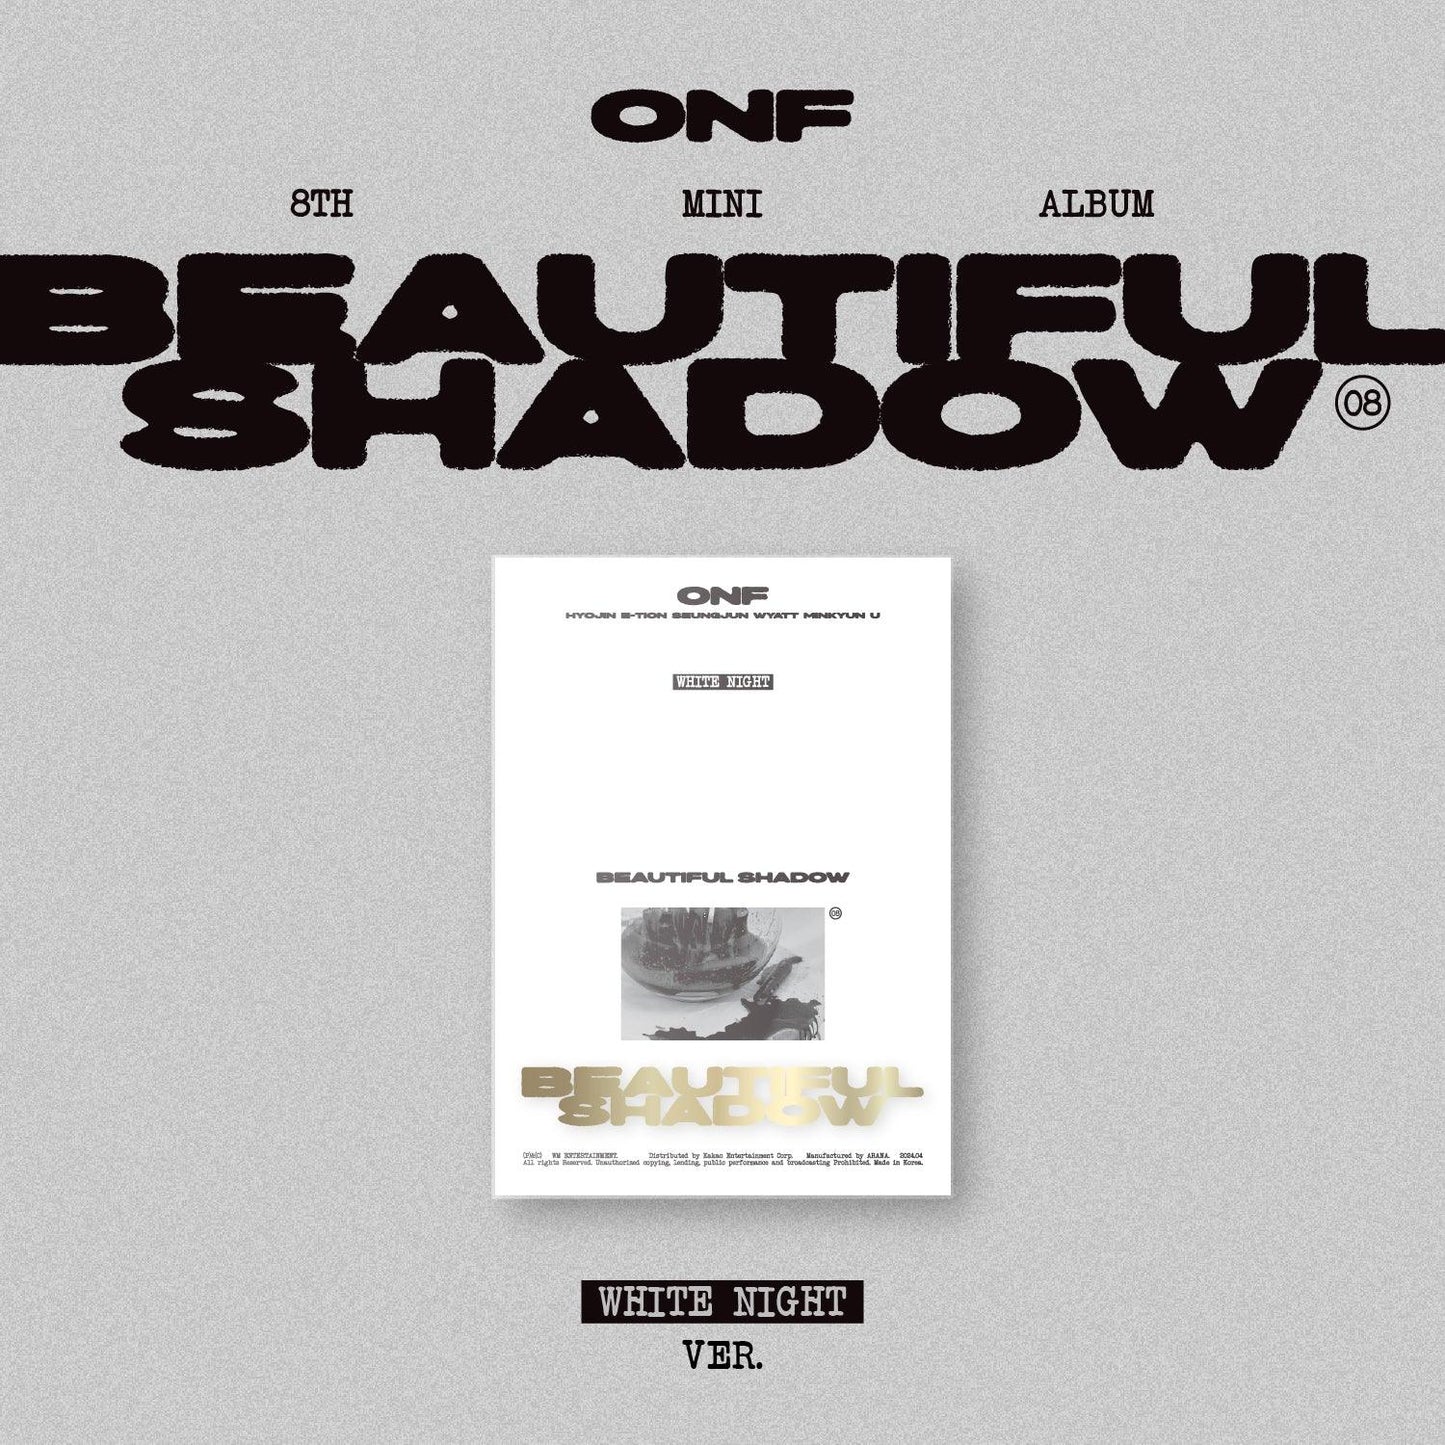 ONF - [BEAUTIFUL SHADOW]